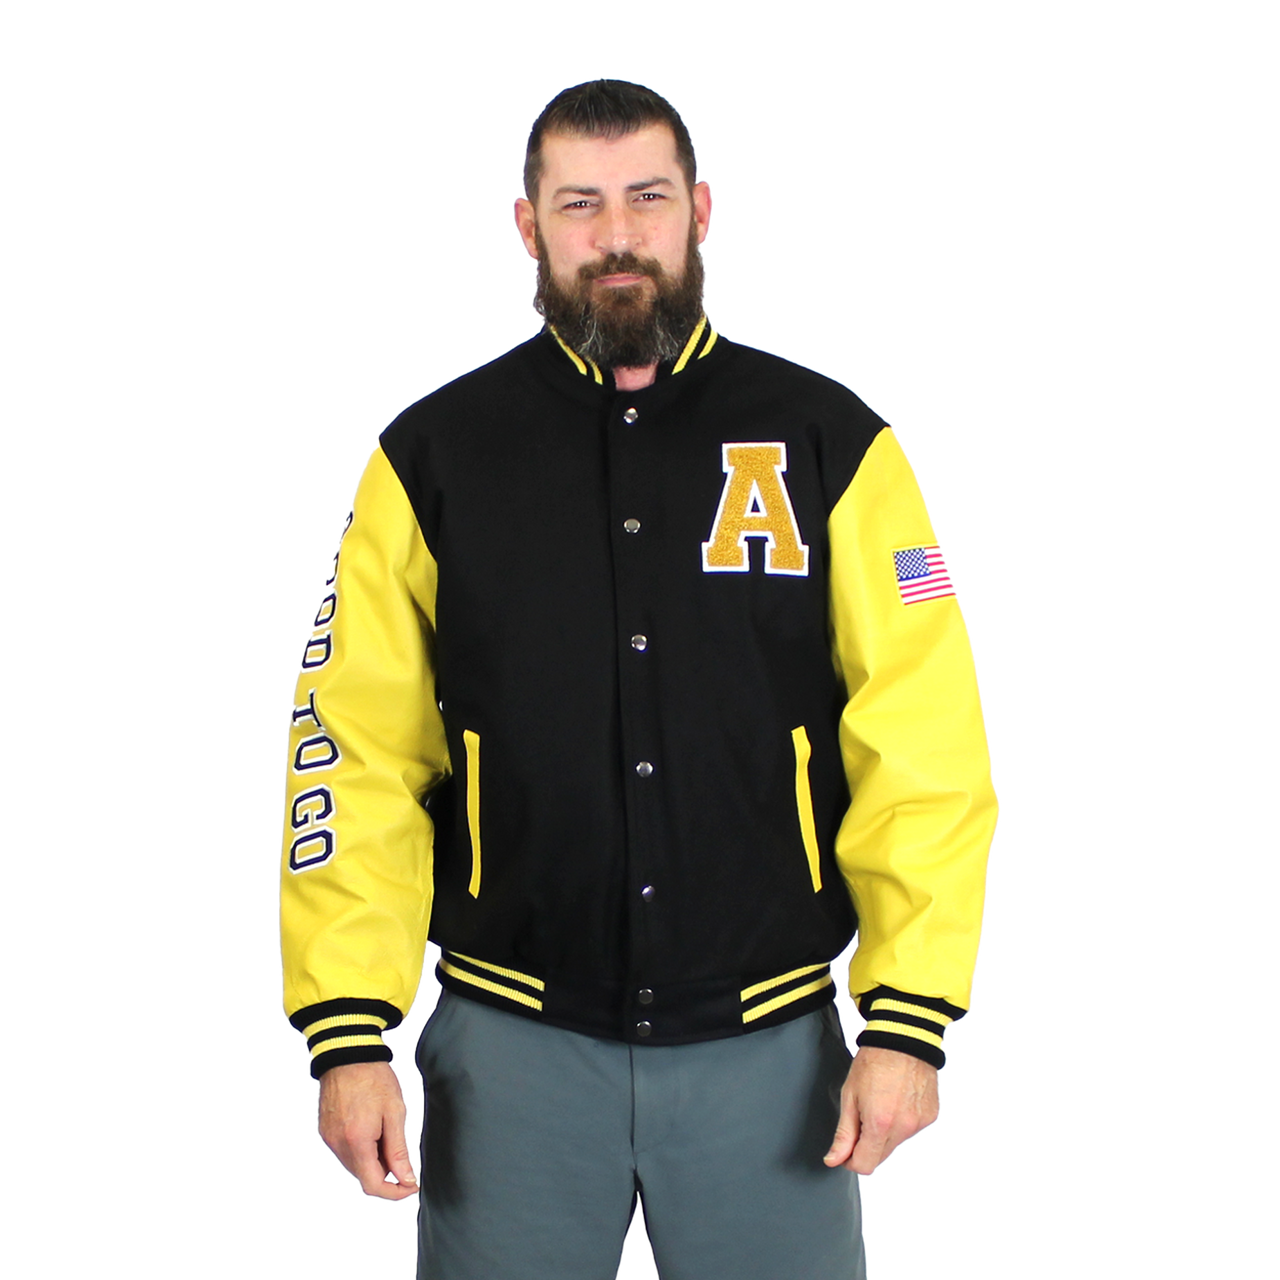 JWM Wholesale JWM Military Mens Leather Polyester Embroidered Varsity Jacket (Army / black-gold, XX-Large), Men's, Size: 2XL